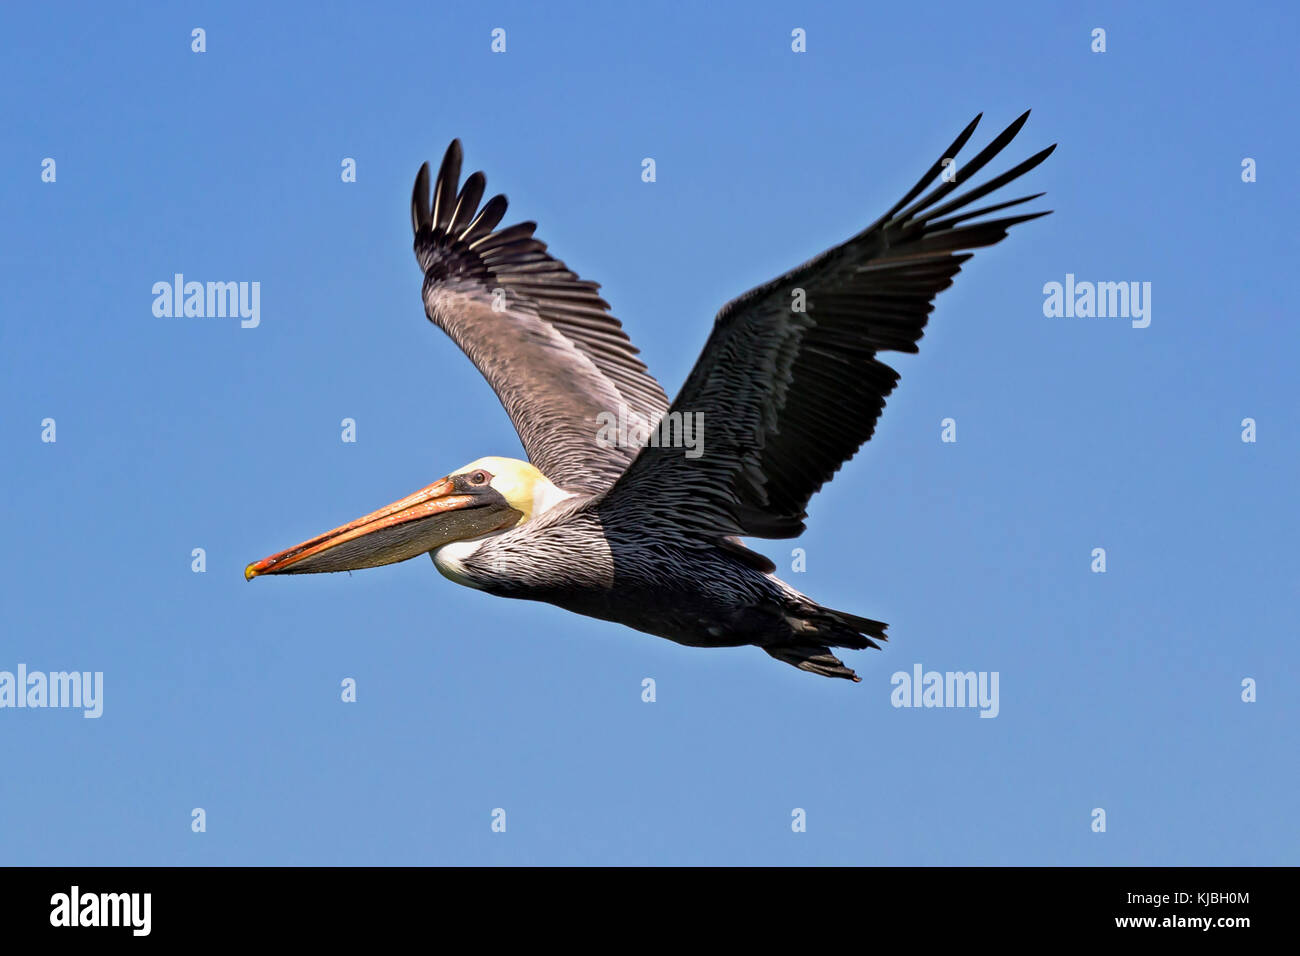 Normally seen flying in squadrons low over the surf line this Brown Pelican (Pelecanus occidentalis) flies solo over the waters of San Francisco Bay.  Stock Photo